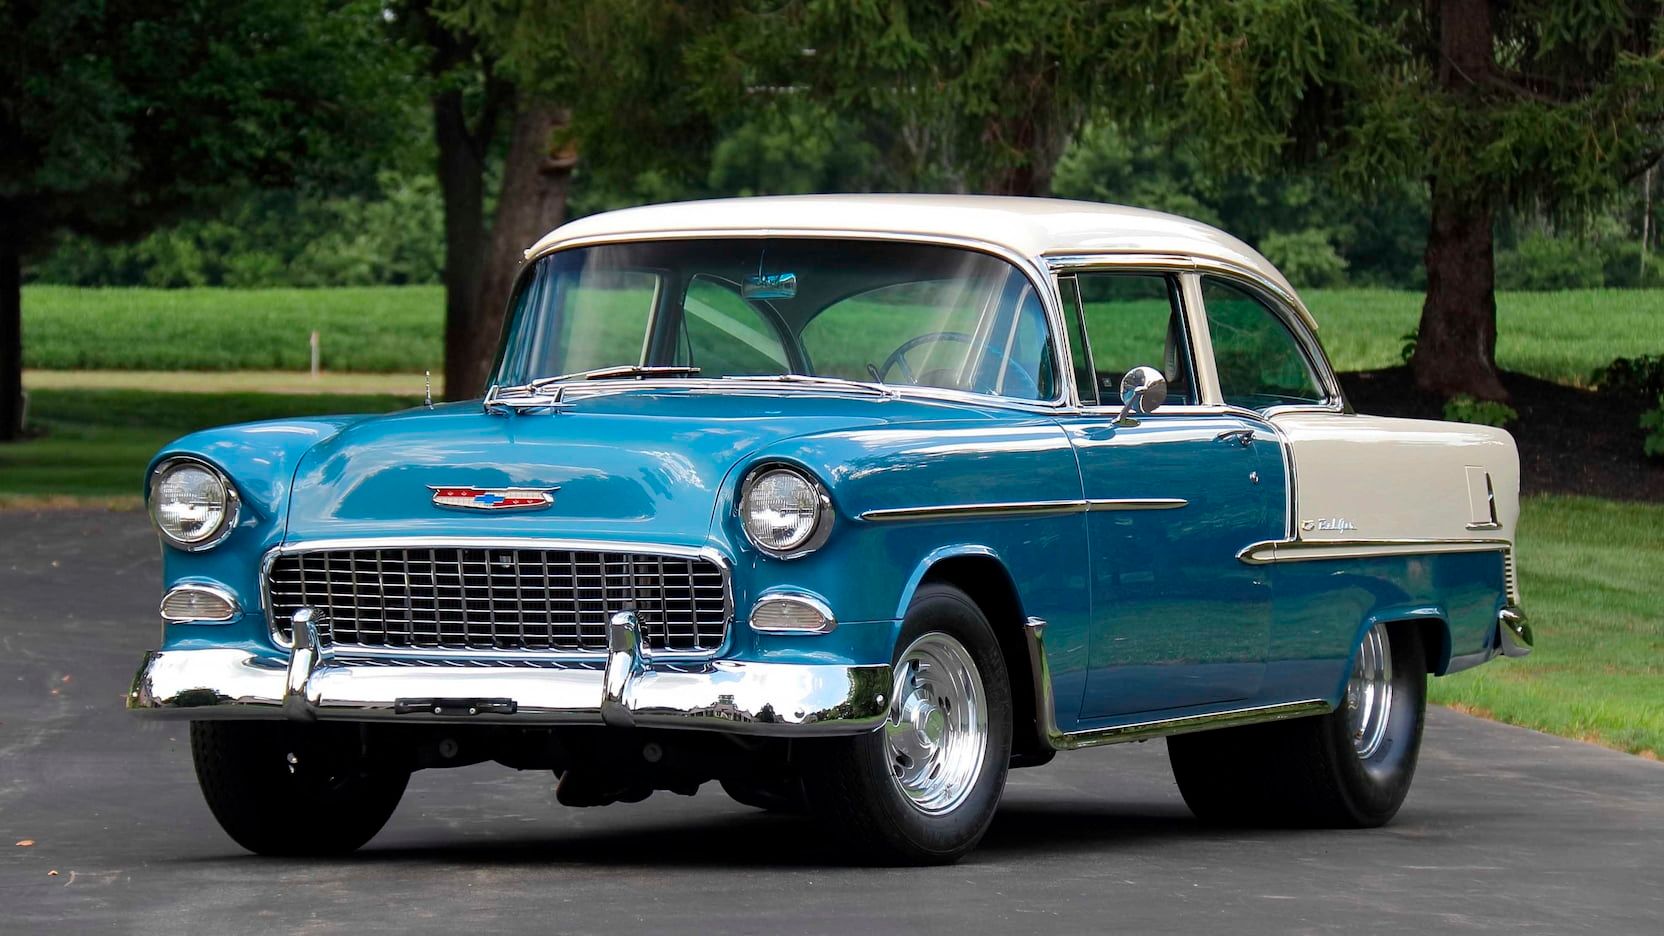 Blue 1955 Chevrolet Bel Air on the road